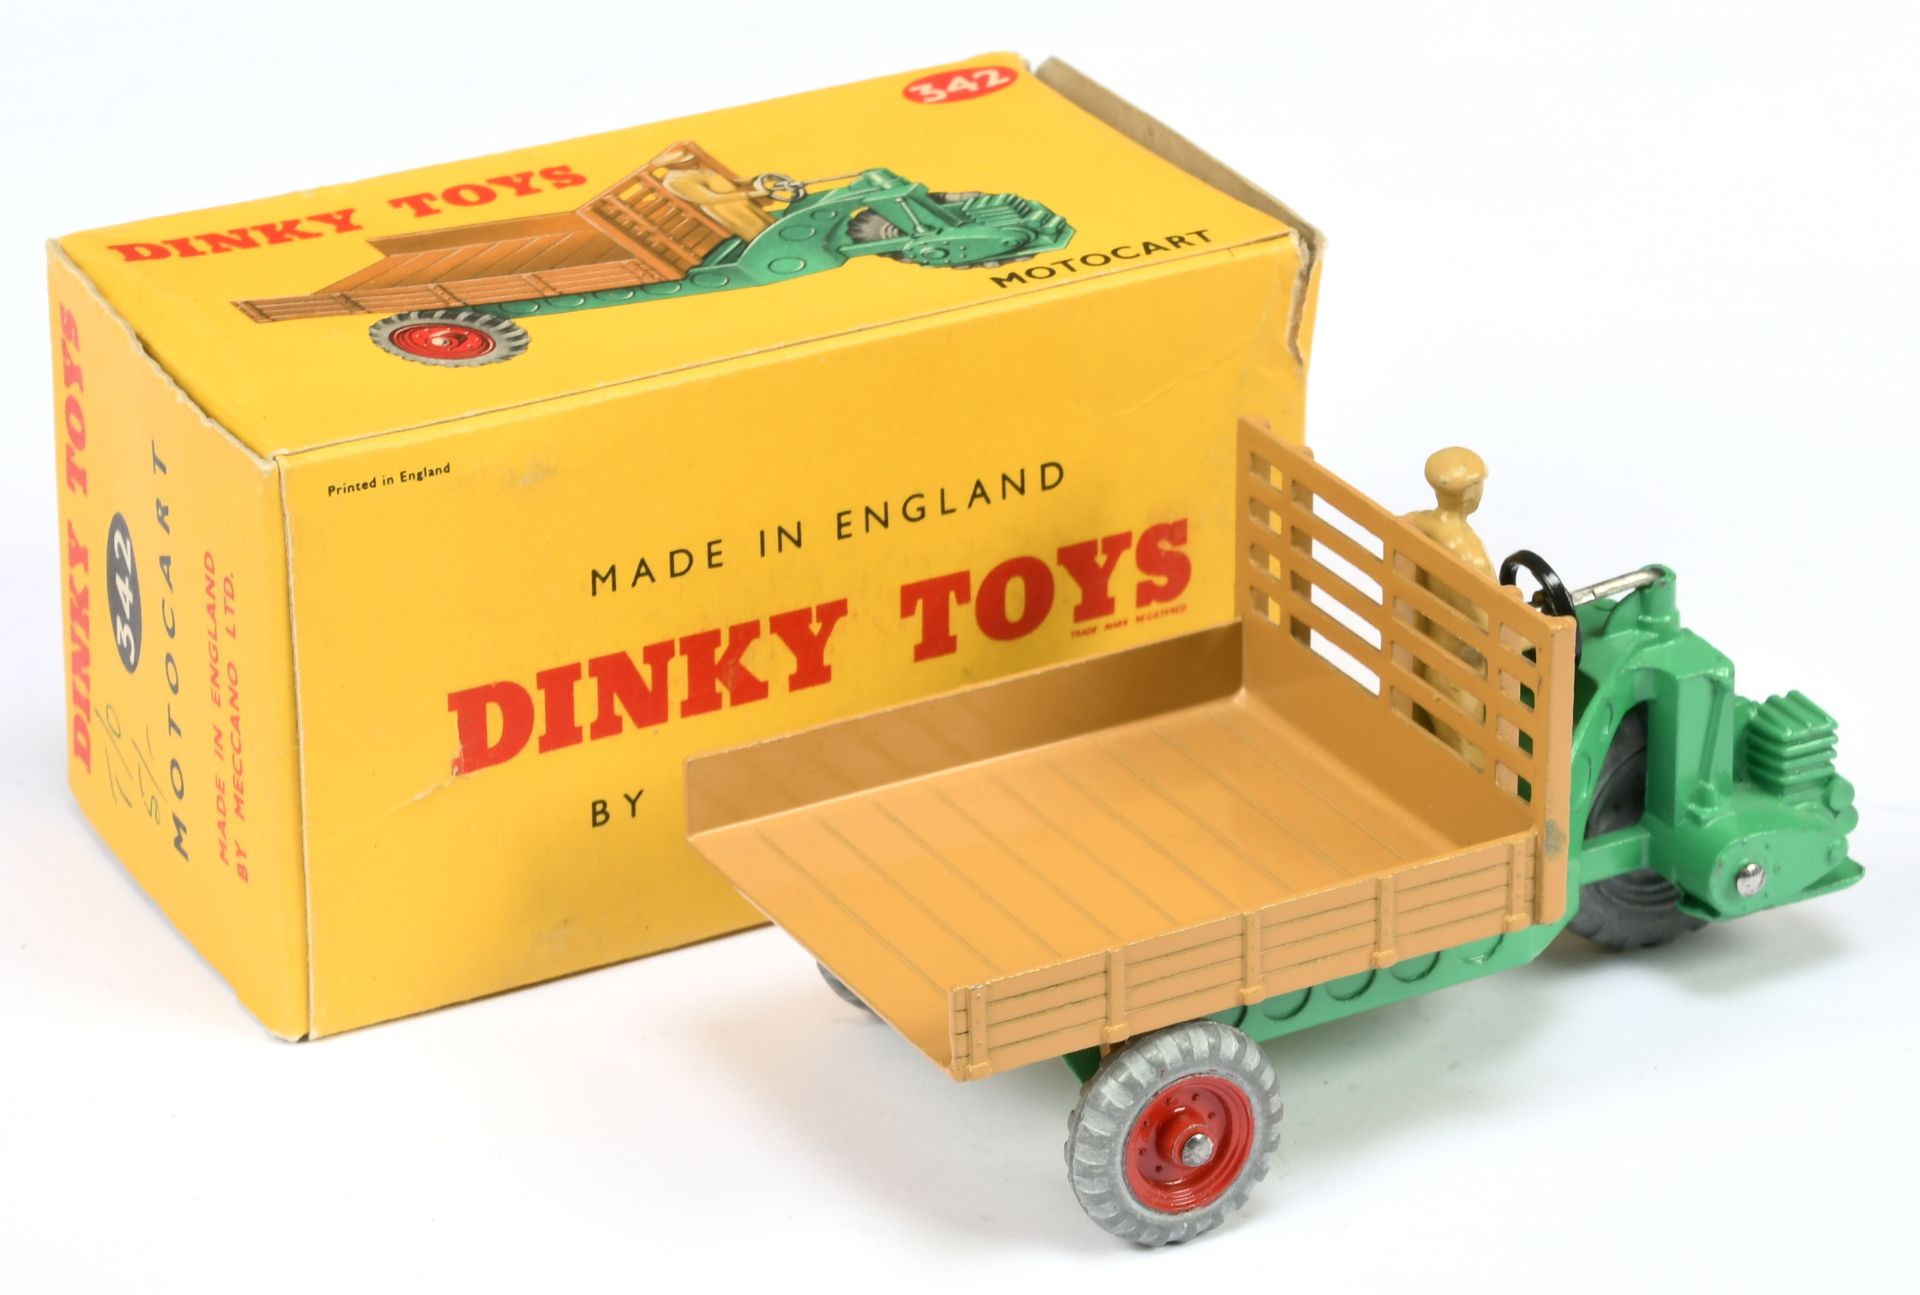 Dinky Toys 342 Motorcart - Mid green including chassis, tan back and figure, red metal wheels  - Image 2 of 2